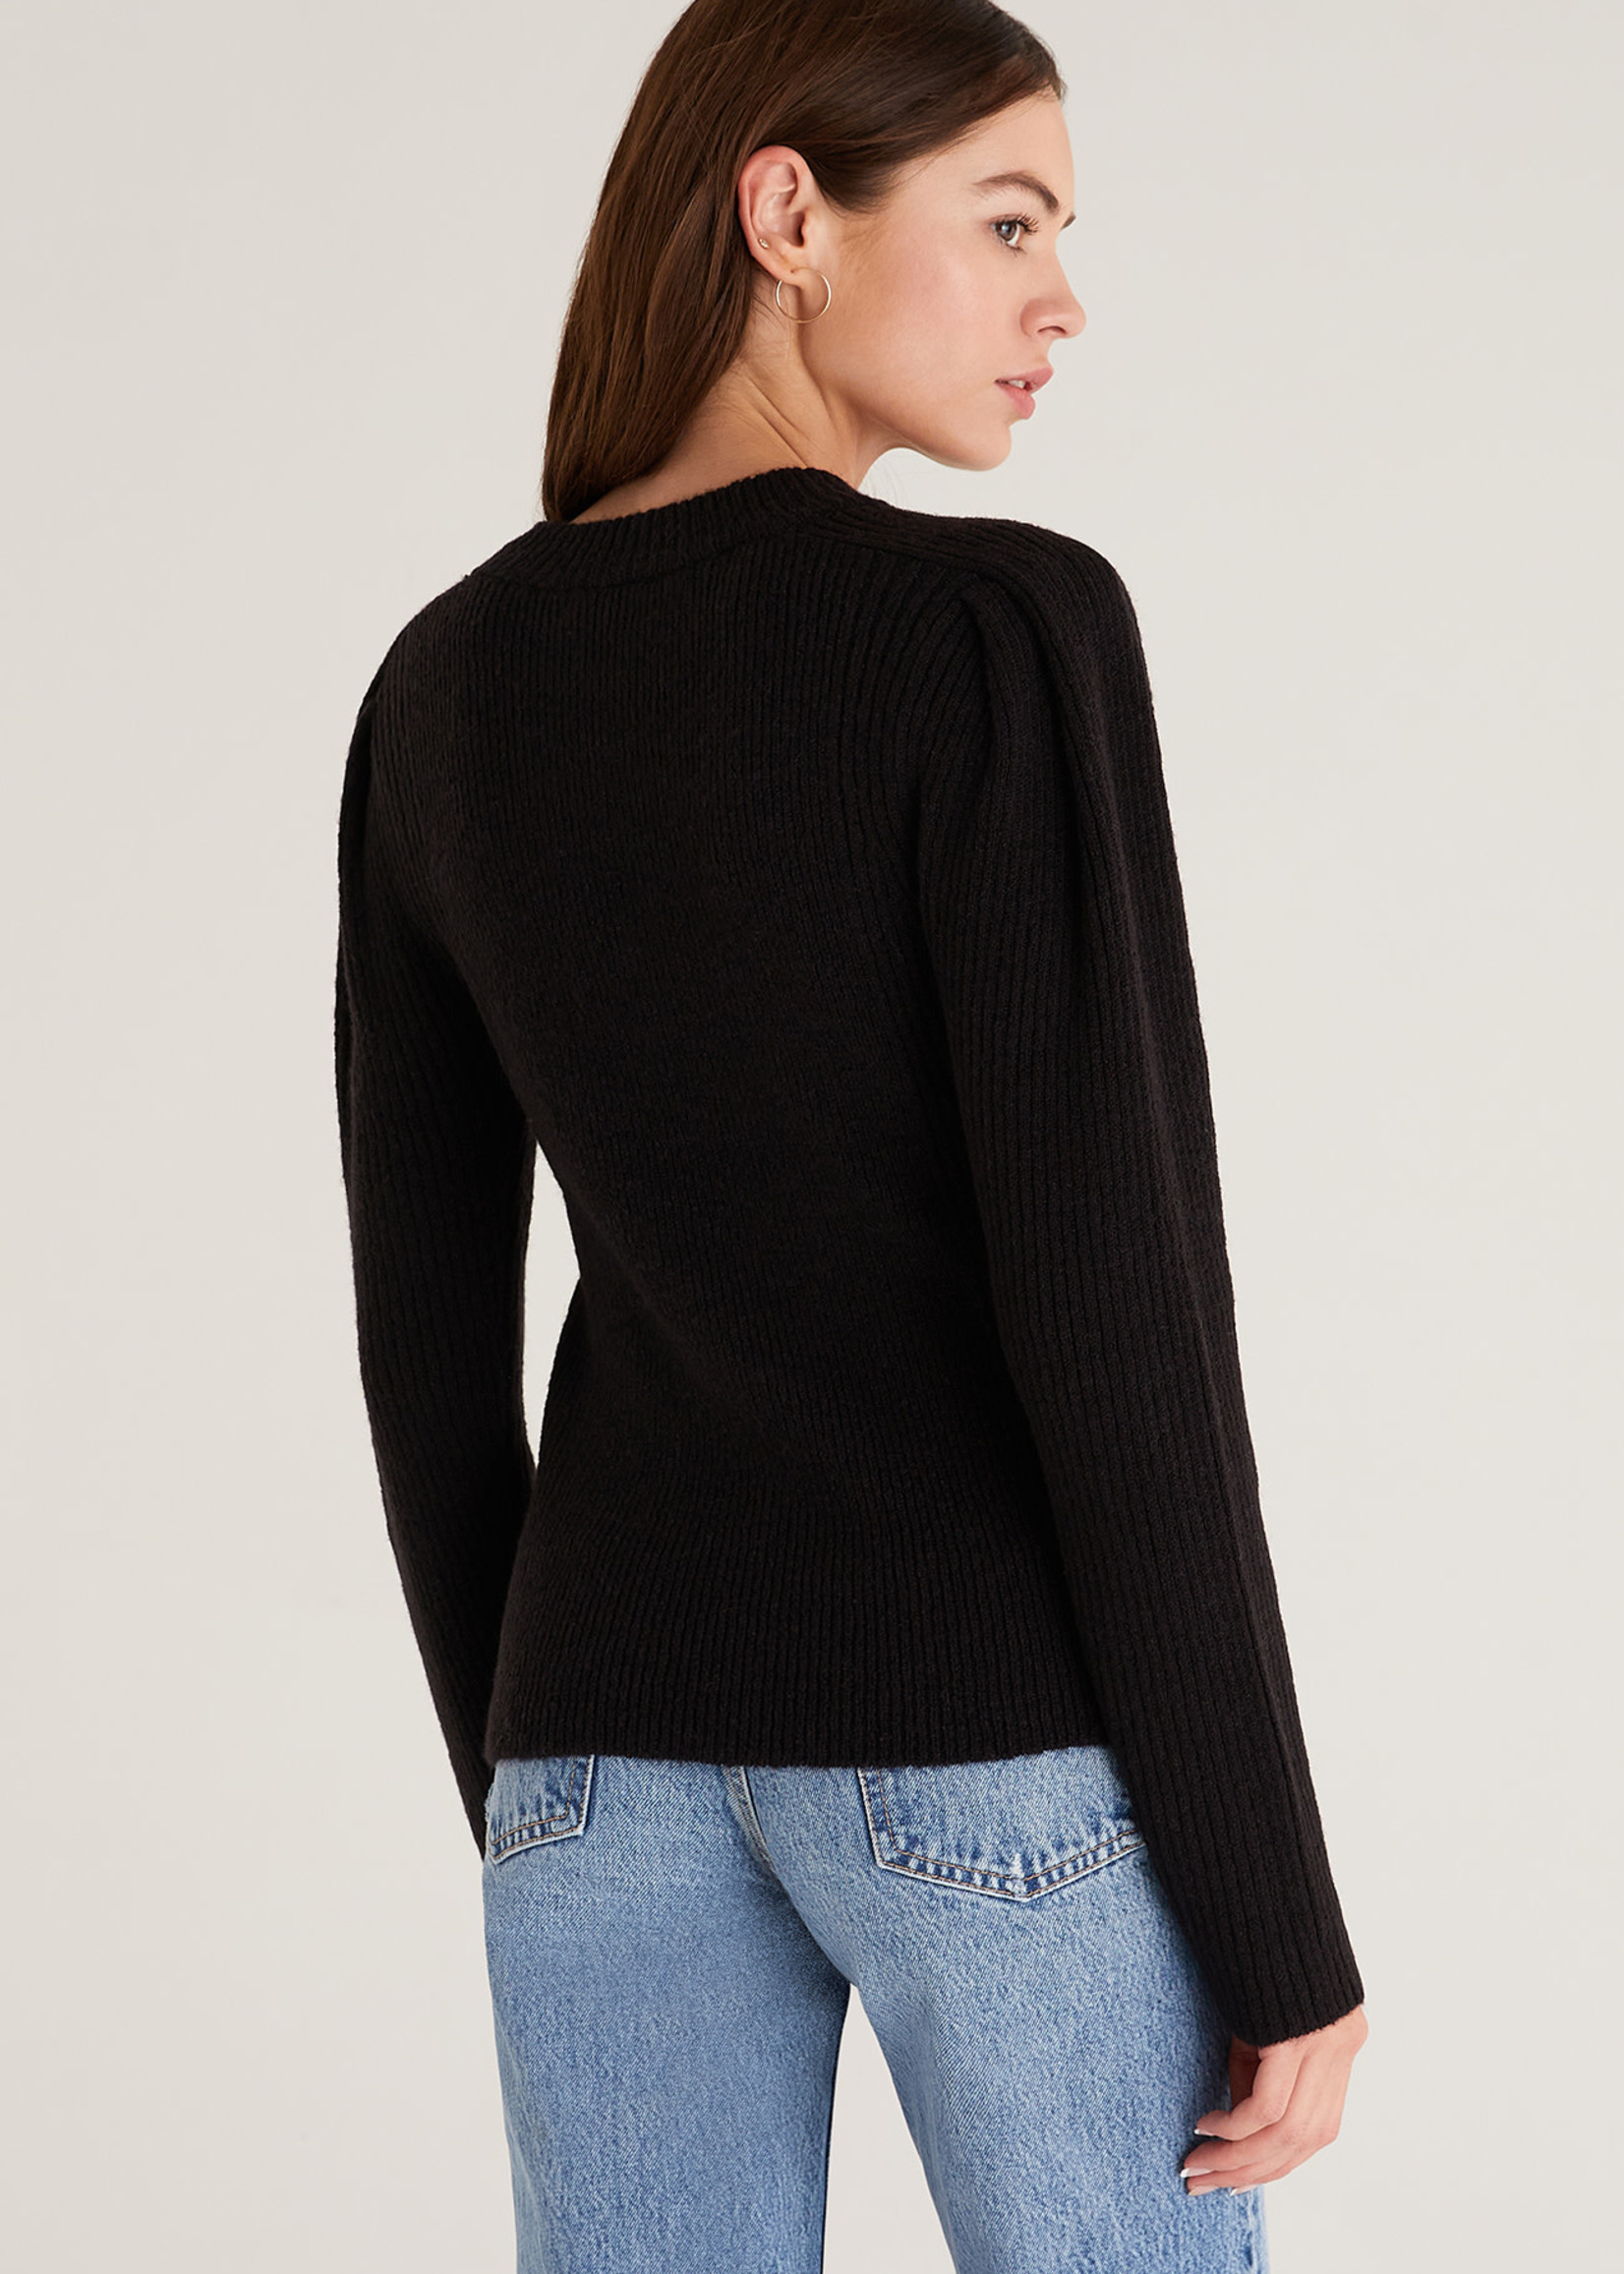 Z SUPPLY Meredith Sweater